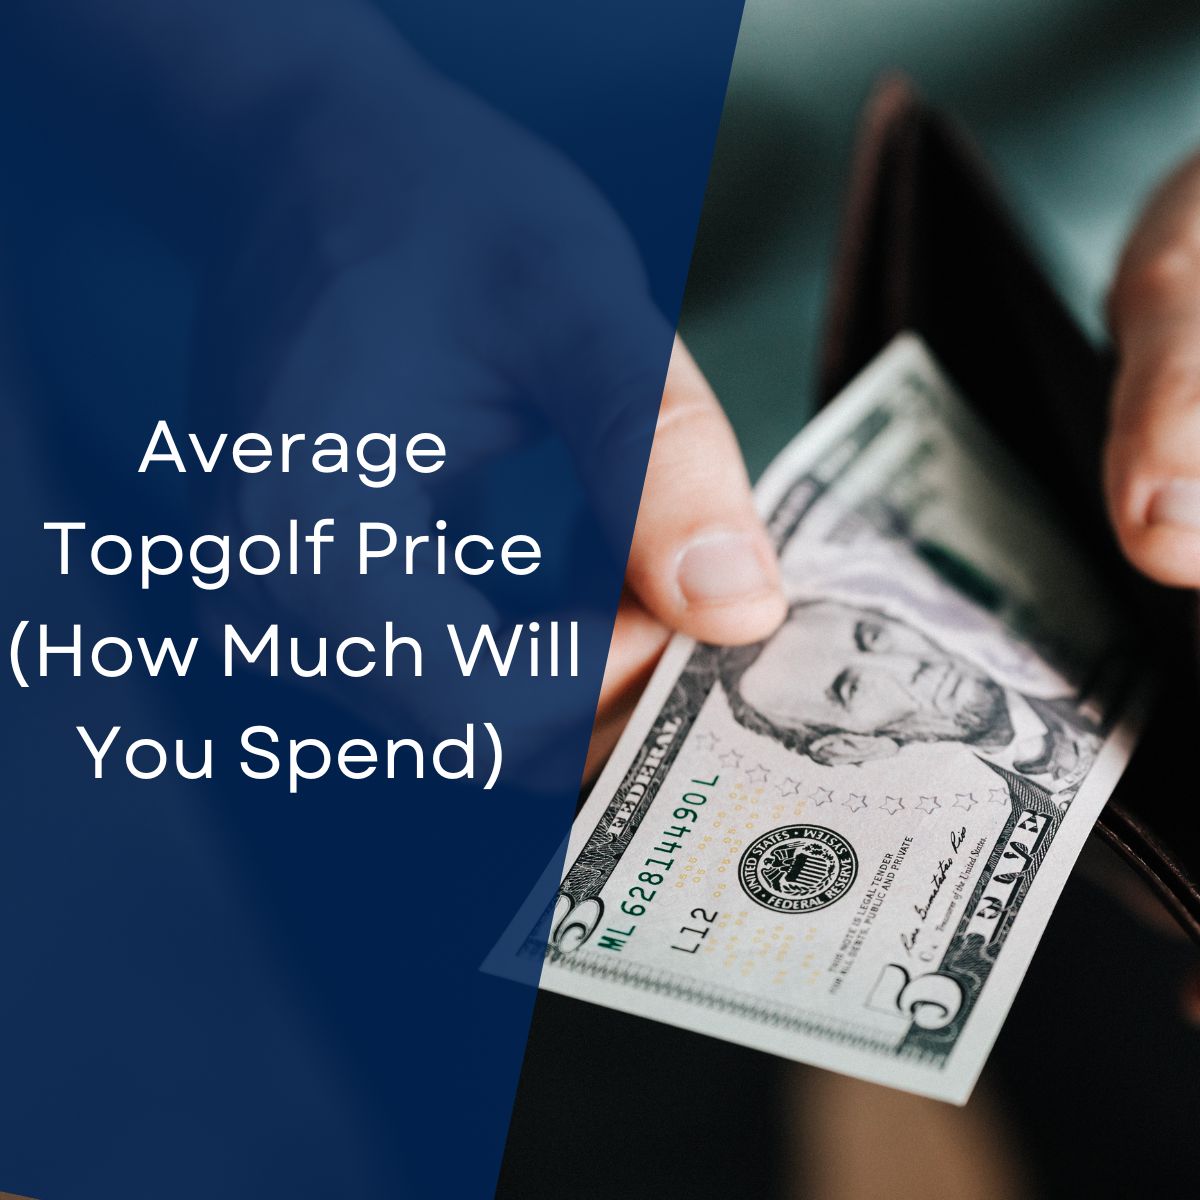 Average Topgolf Price (How Much Will You Spend)